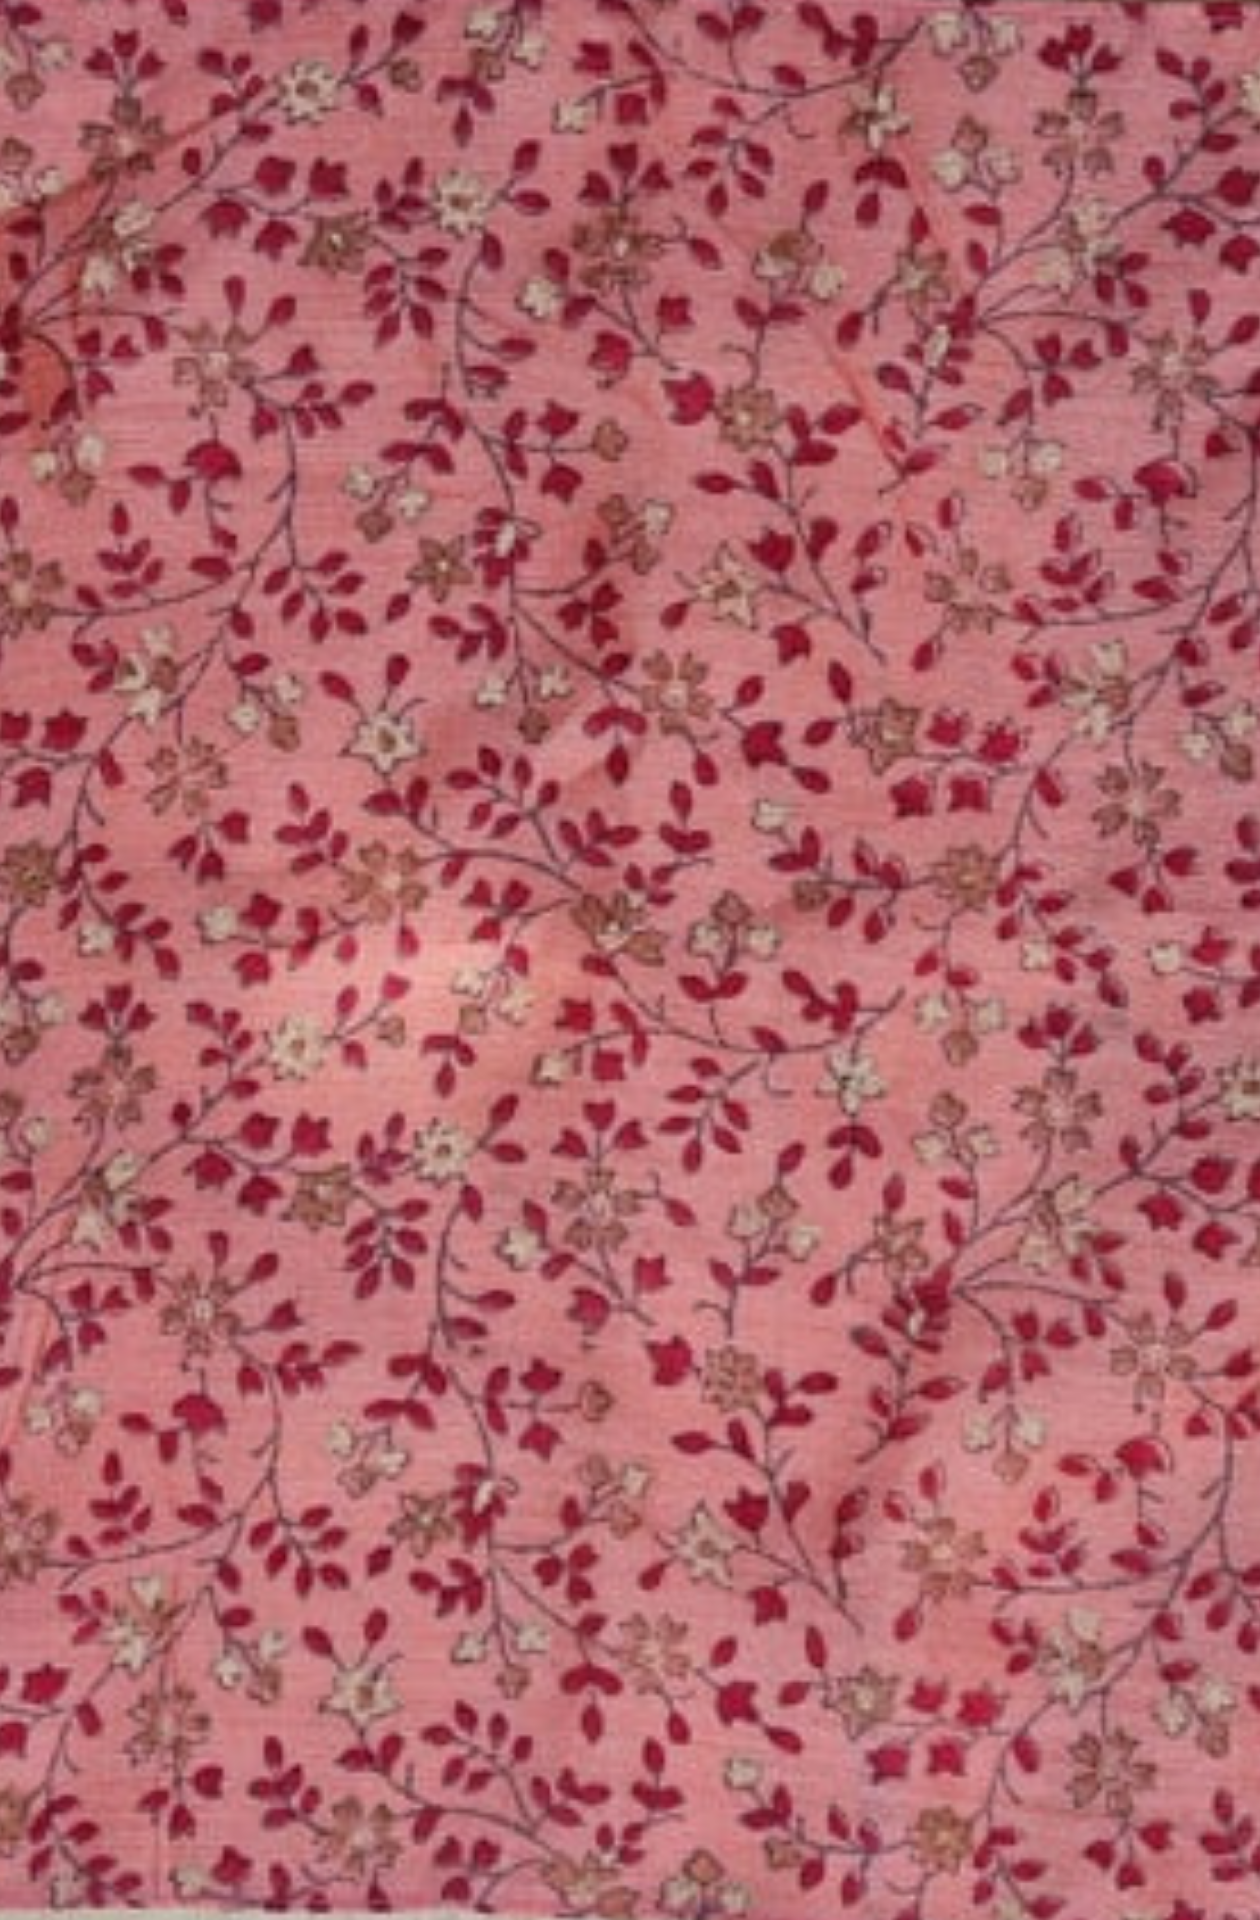 a close up of a pink, red and white floral patterned silk pocket square